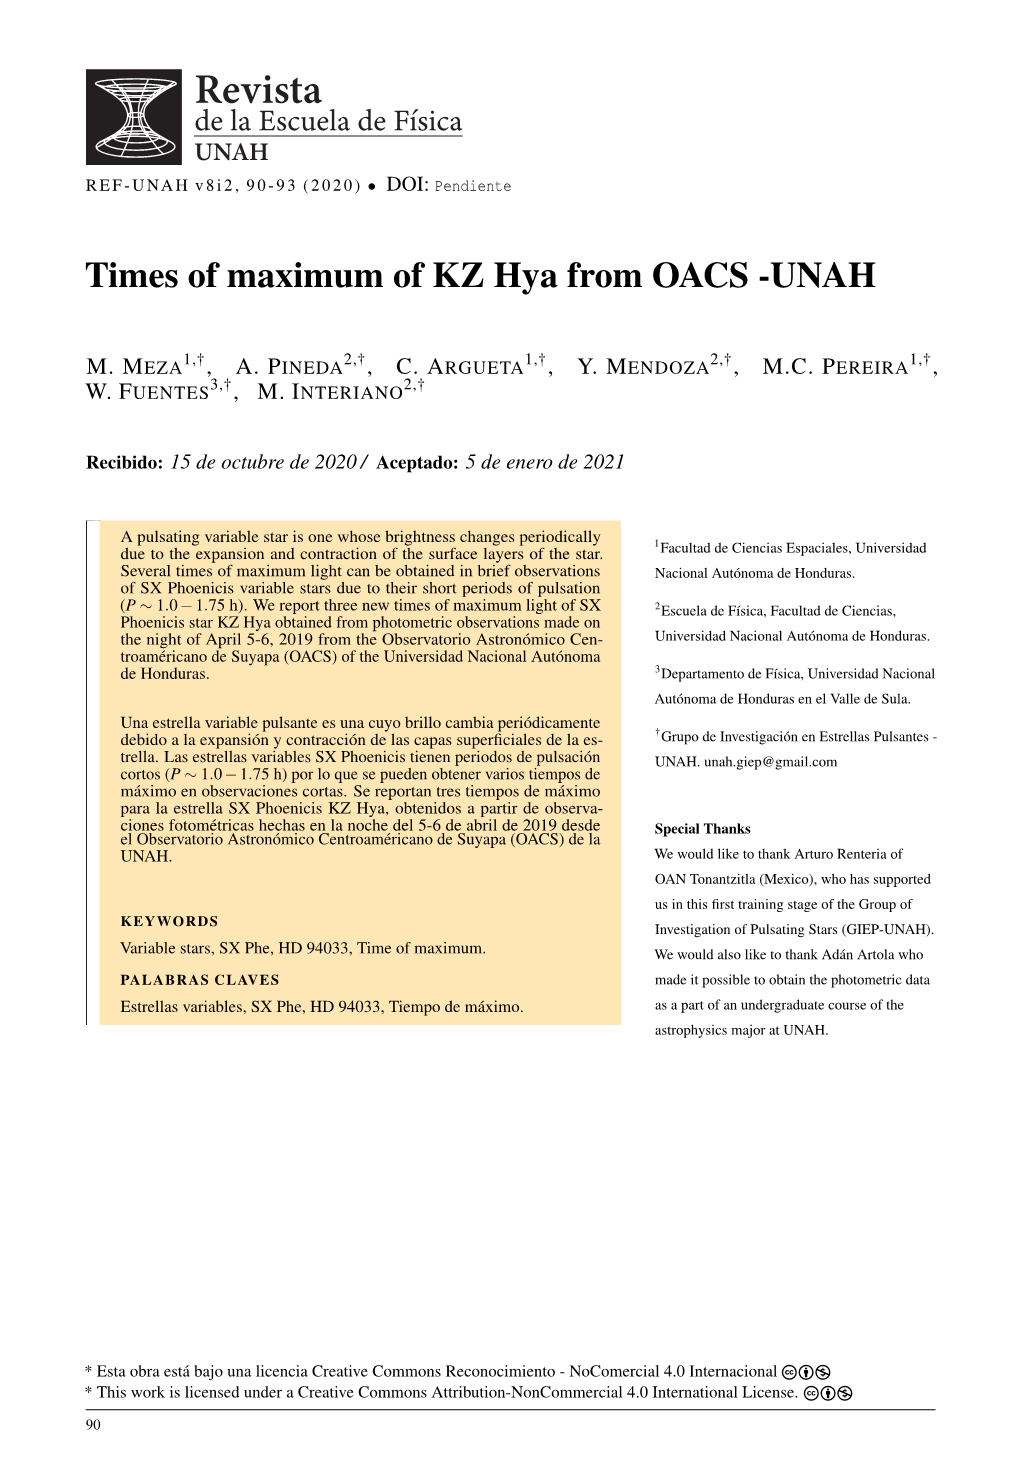 Times of Maximum of KZ Hya from OACS -UNAH